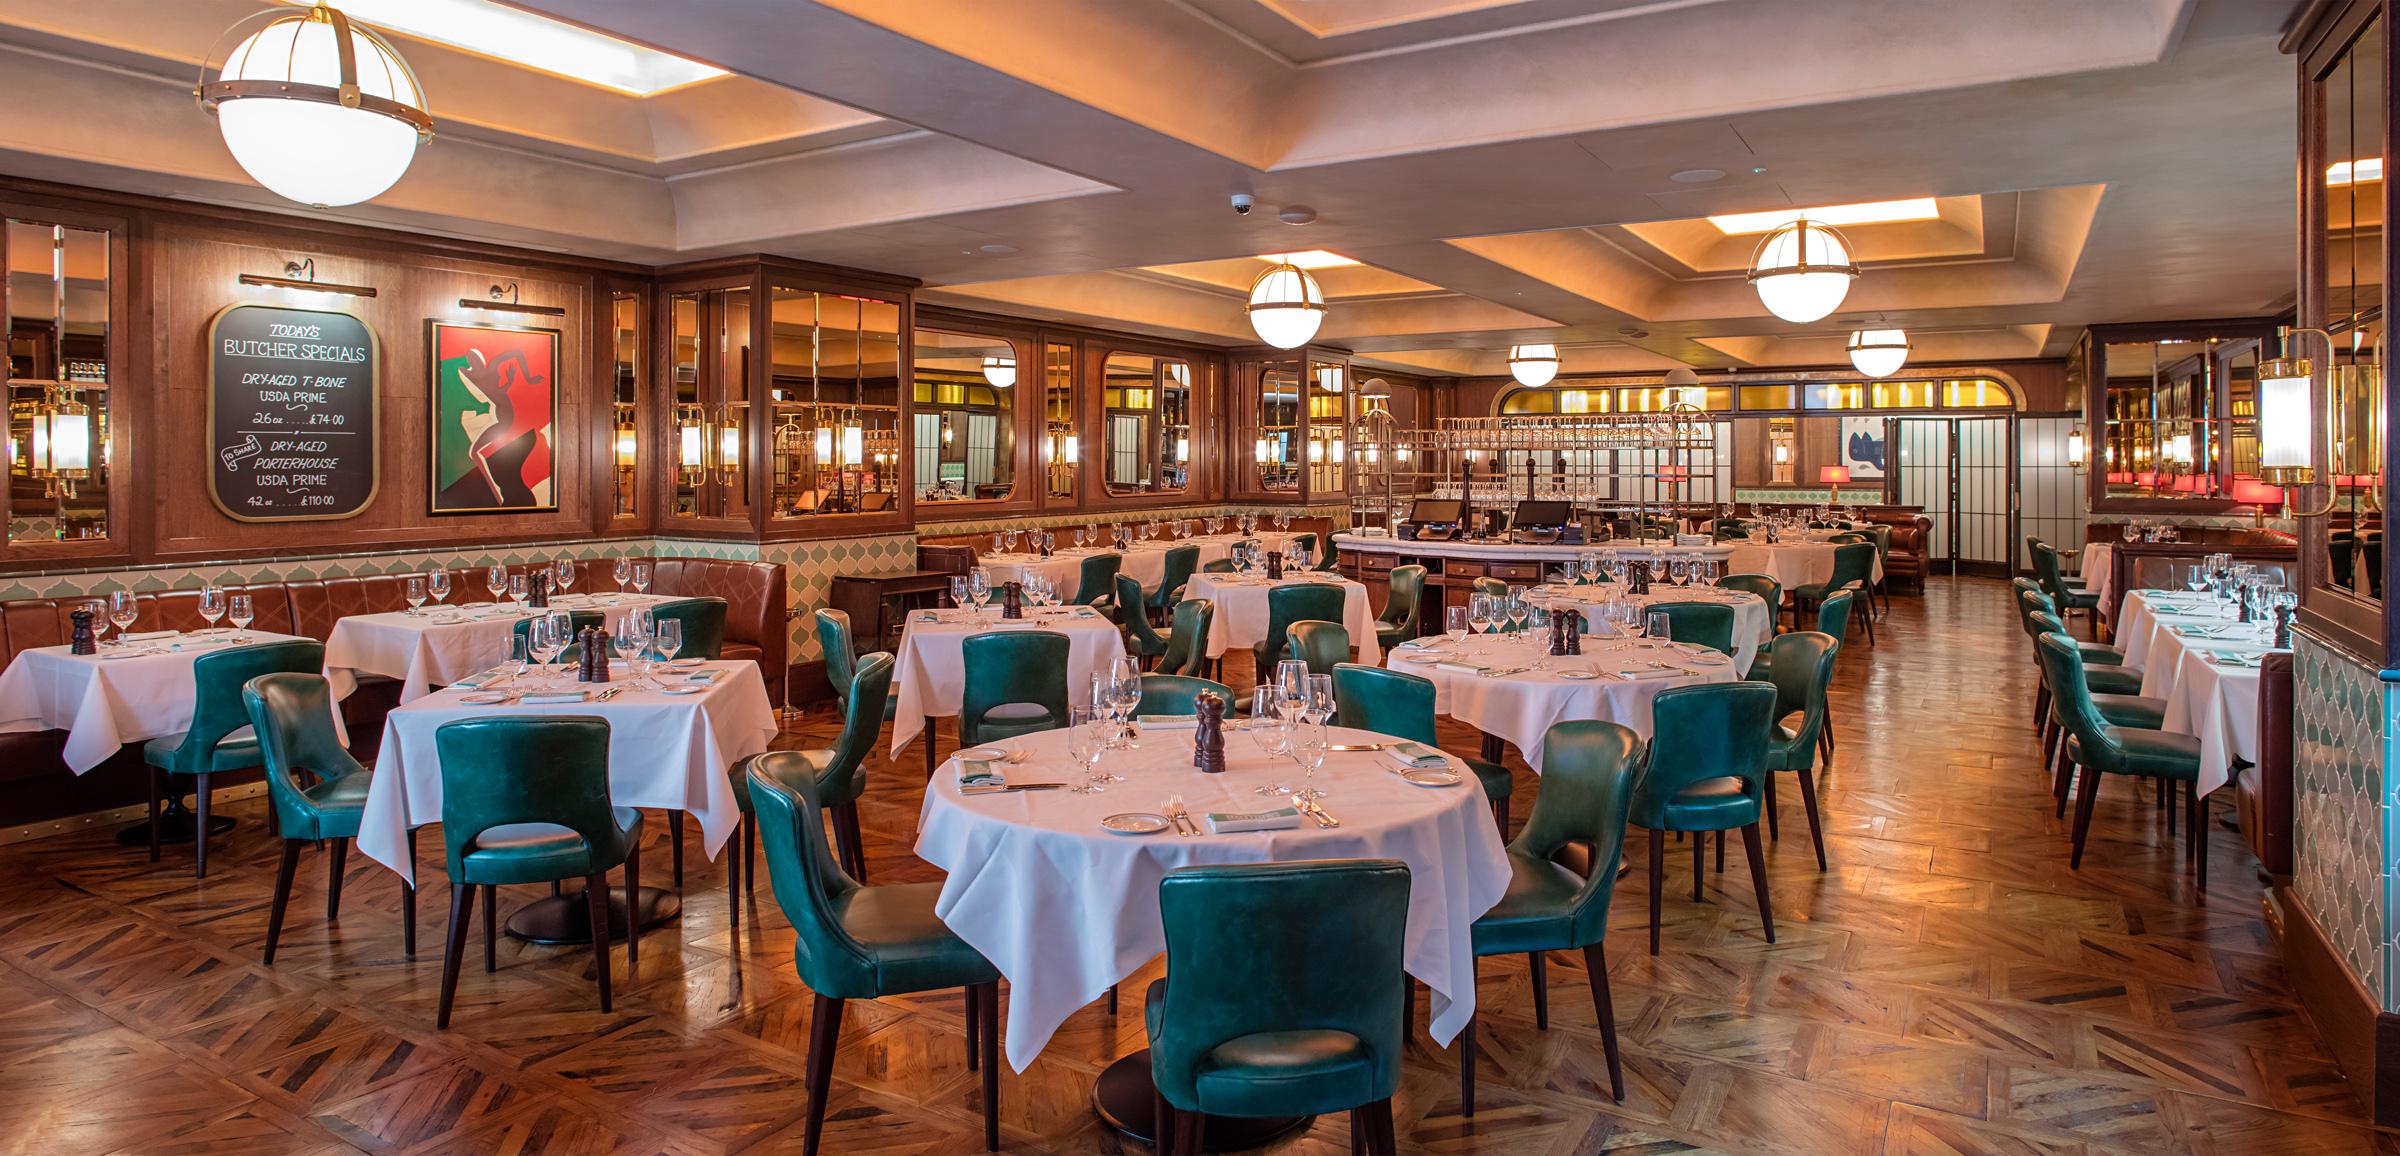 Smith And Wollensky, Main Dining Room photo #1